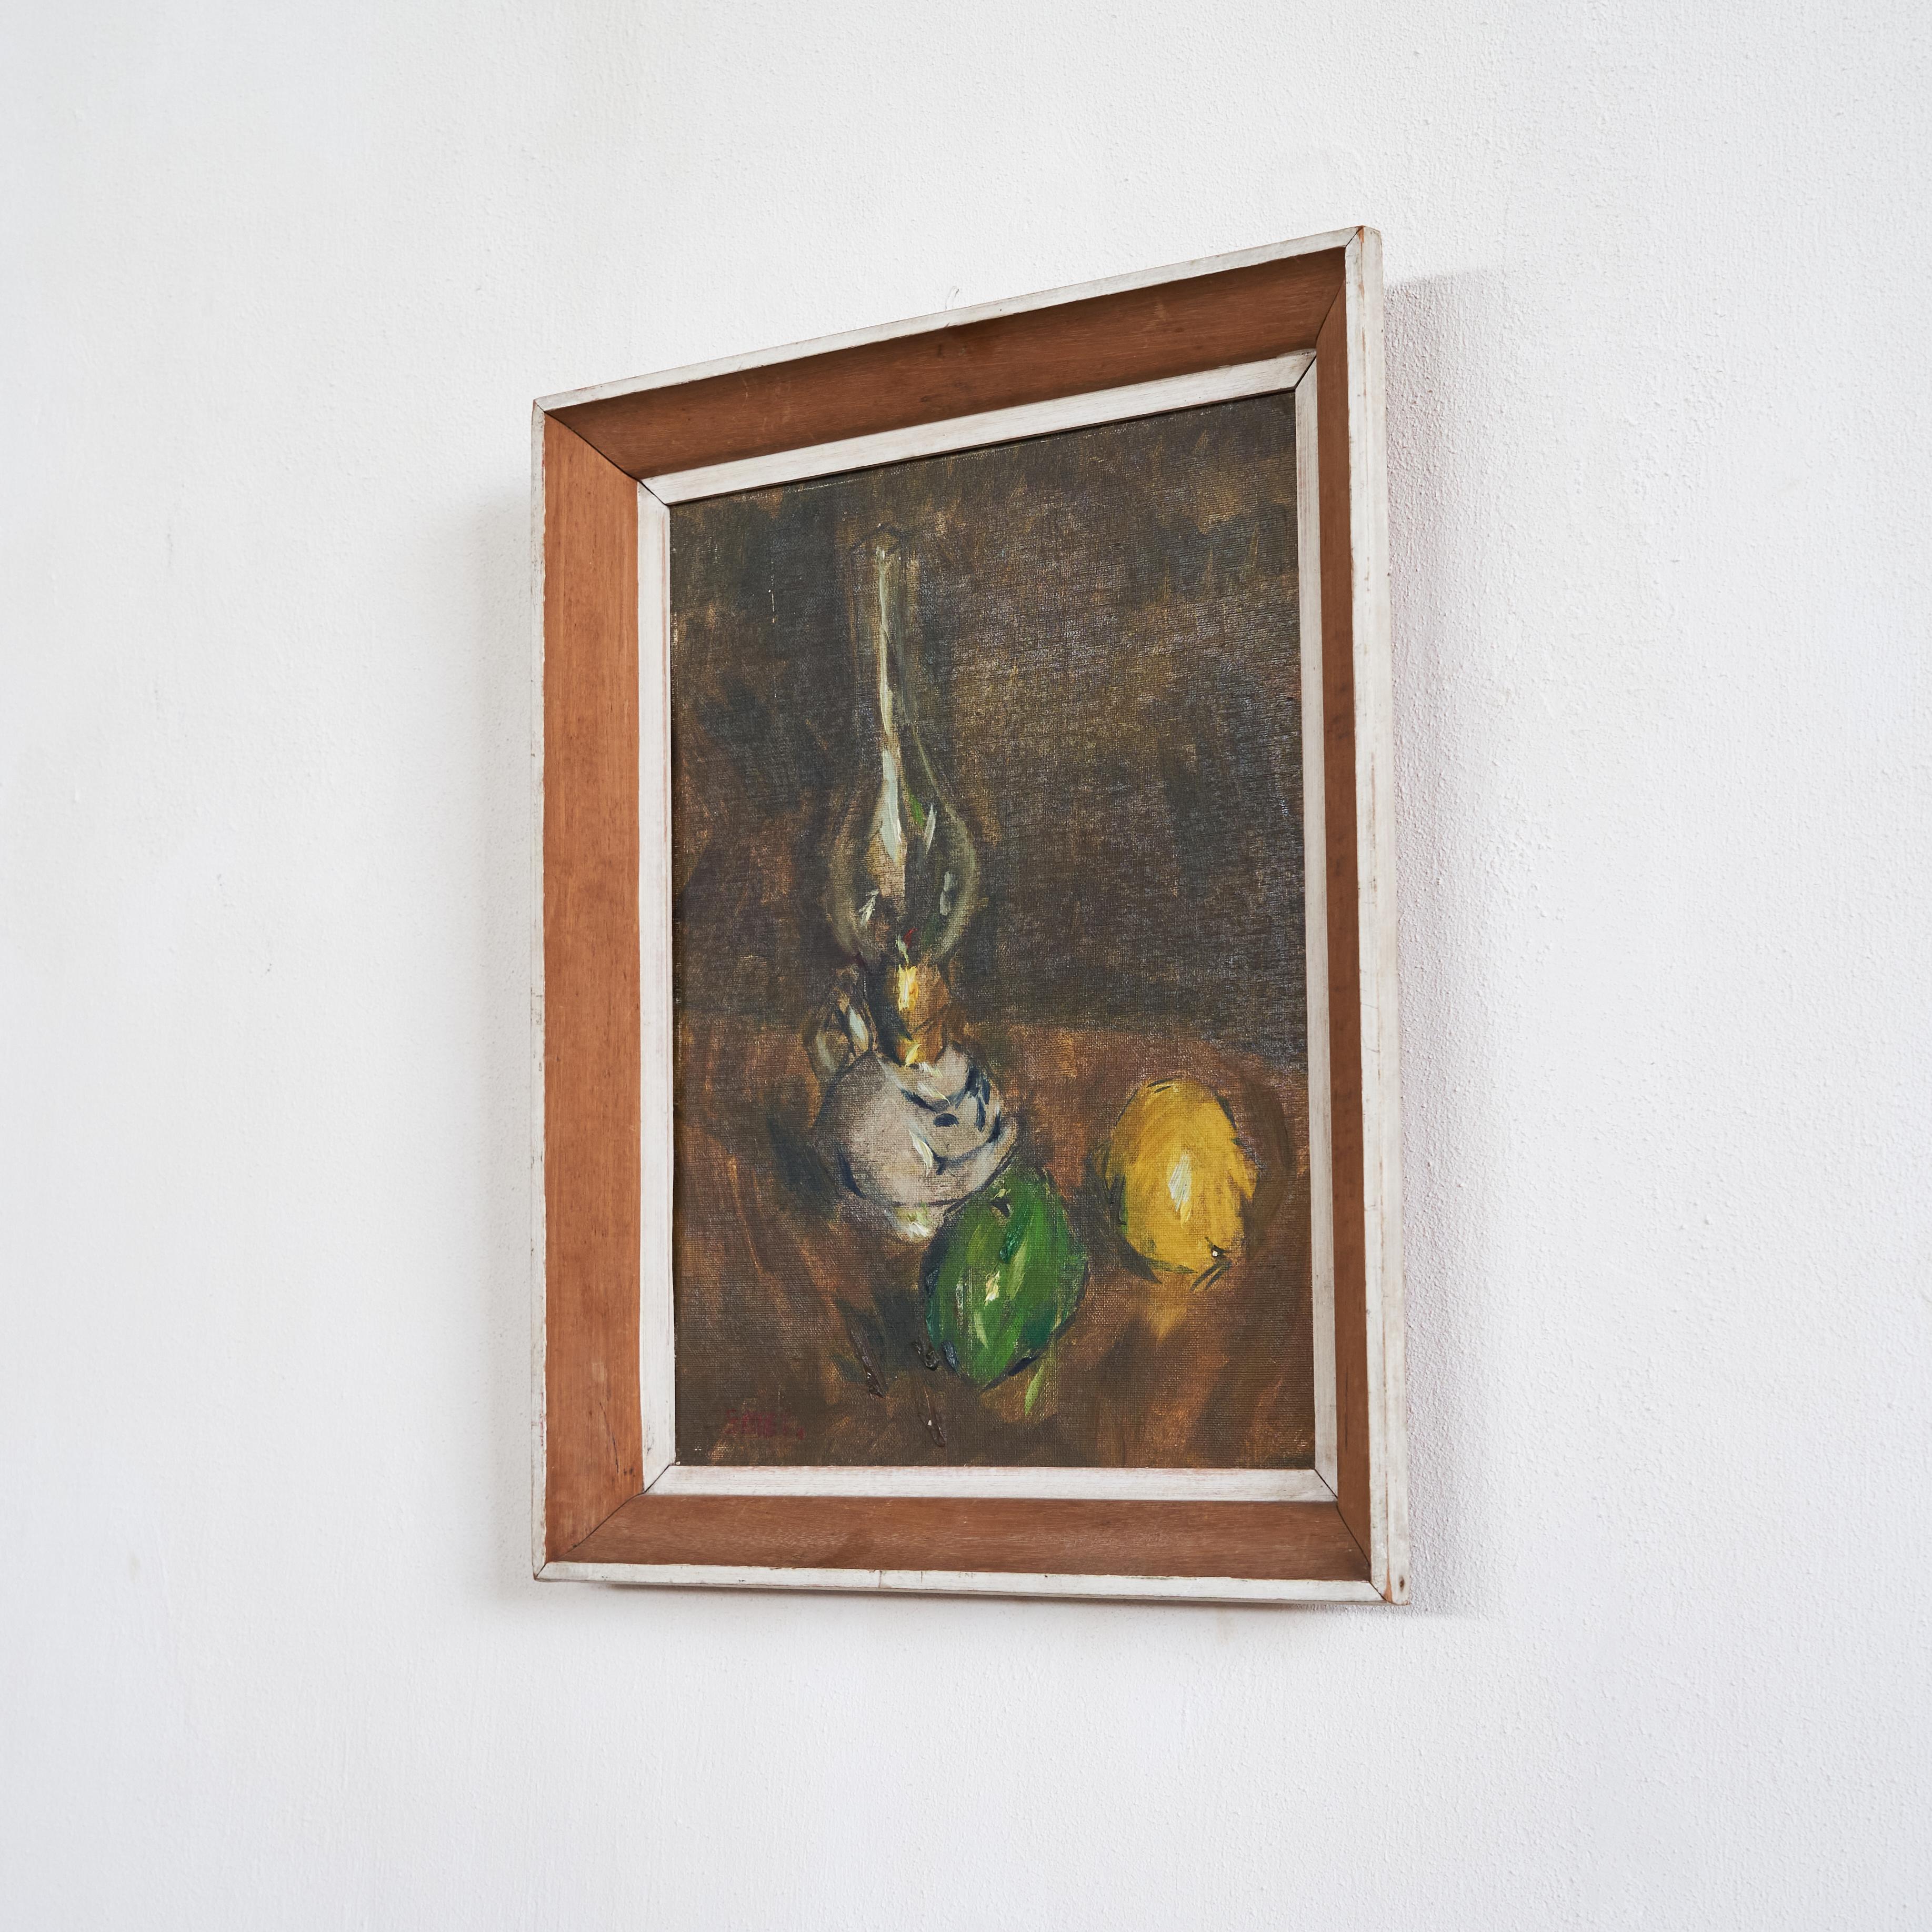 Belgian Gustave de Smet 'Still Life with Oil Lamp and Fruit' Oil on Board 1930s For Sale